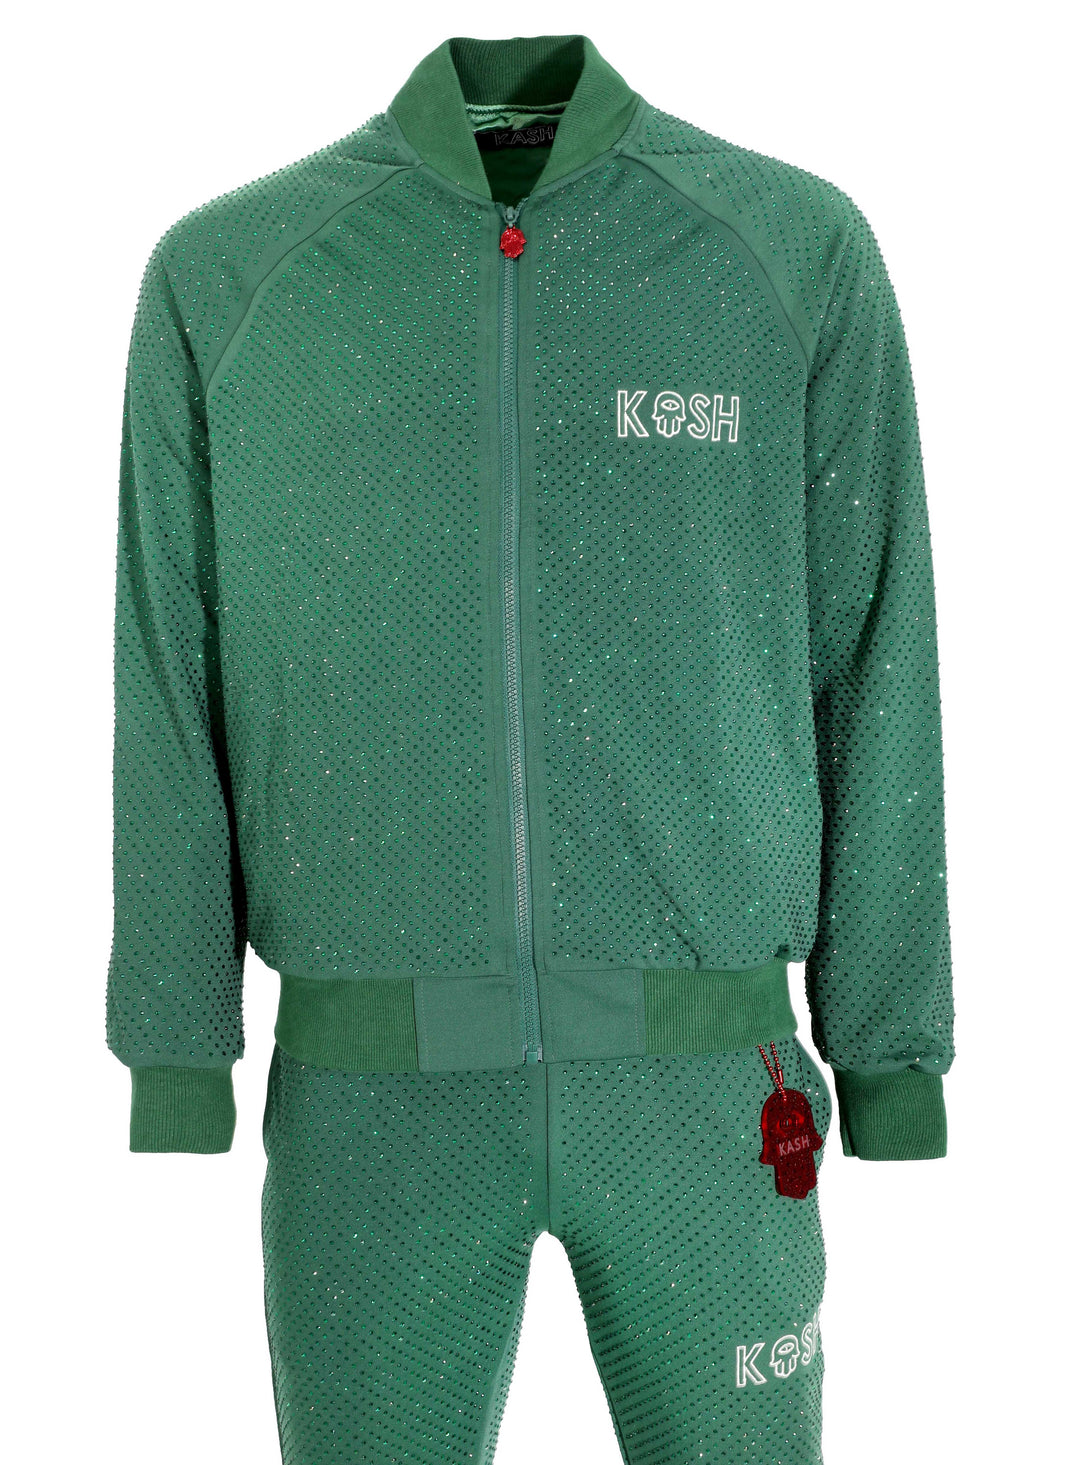 Kash all over diamond track pants Elastic Waistband Drawstring closure Color: Green 100% Polyester Wrinkle Free Material Fits true to size